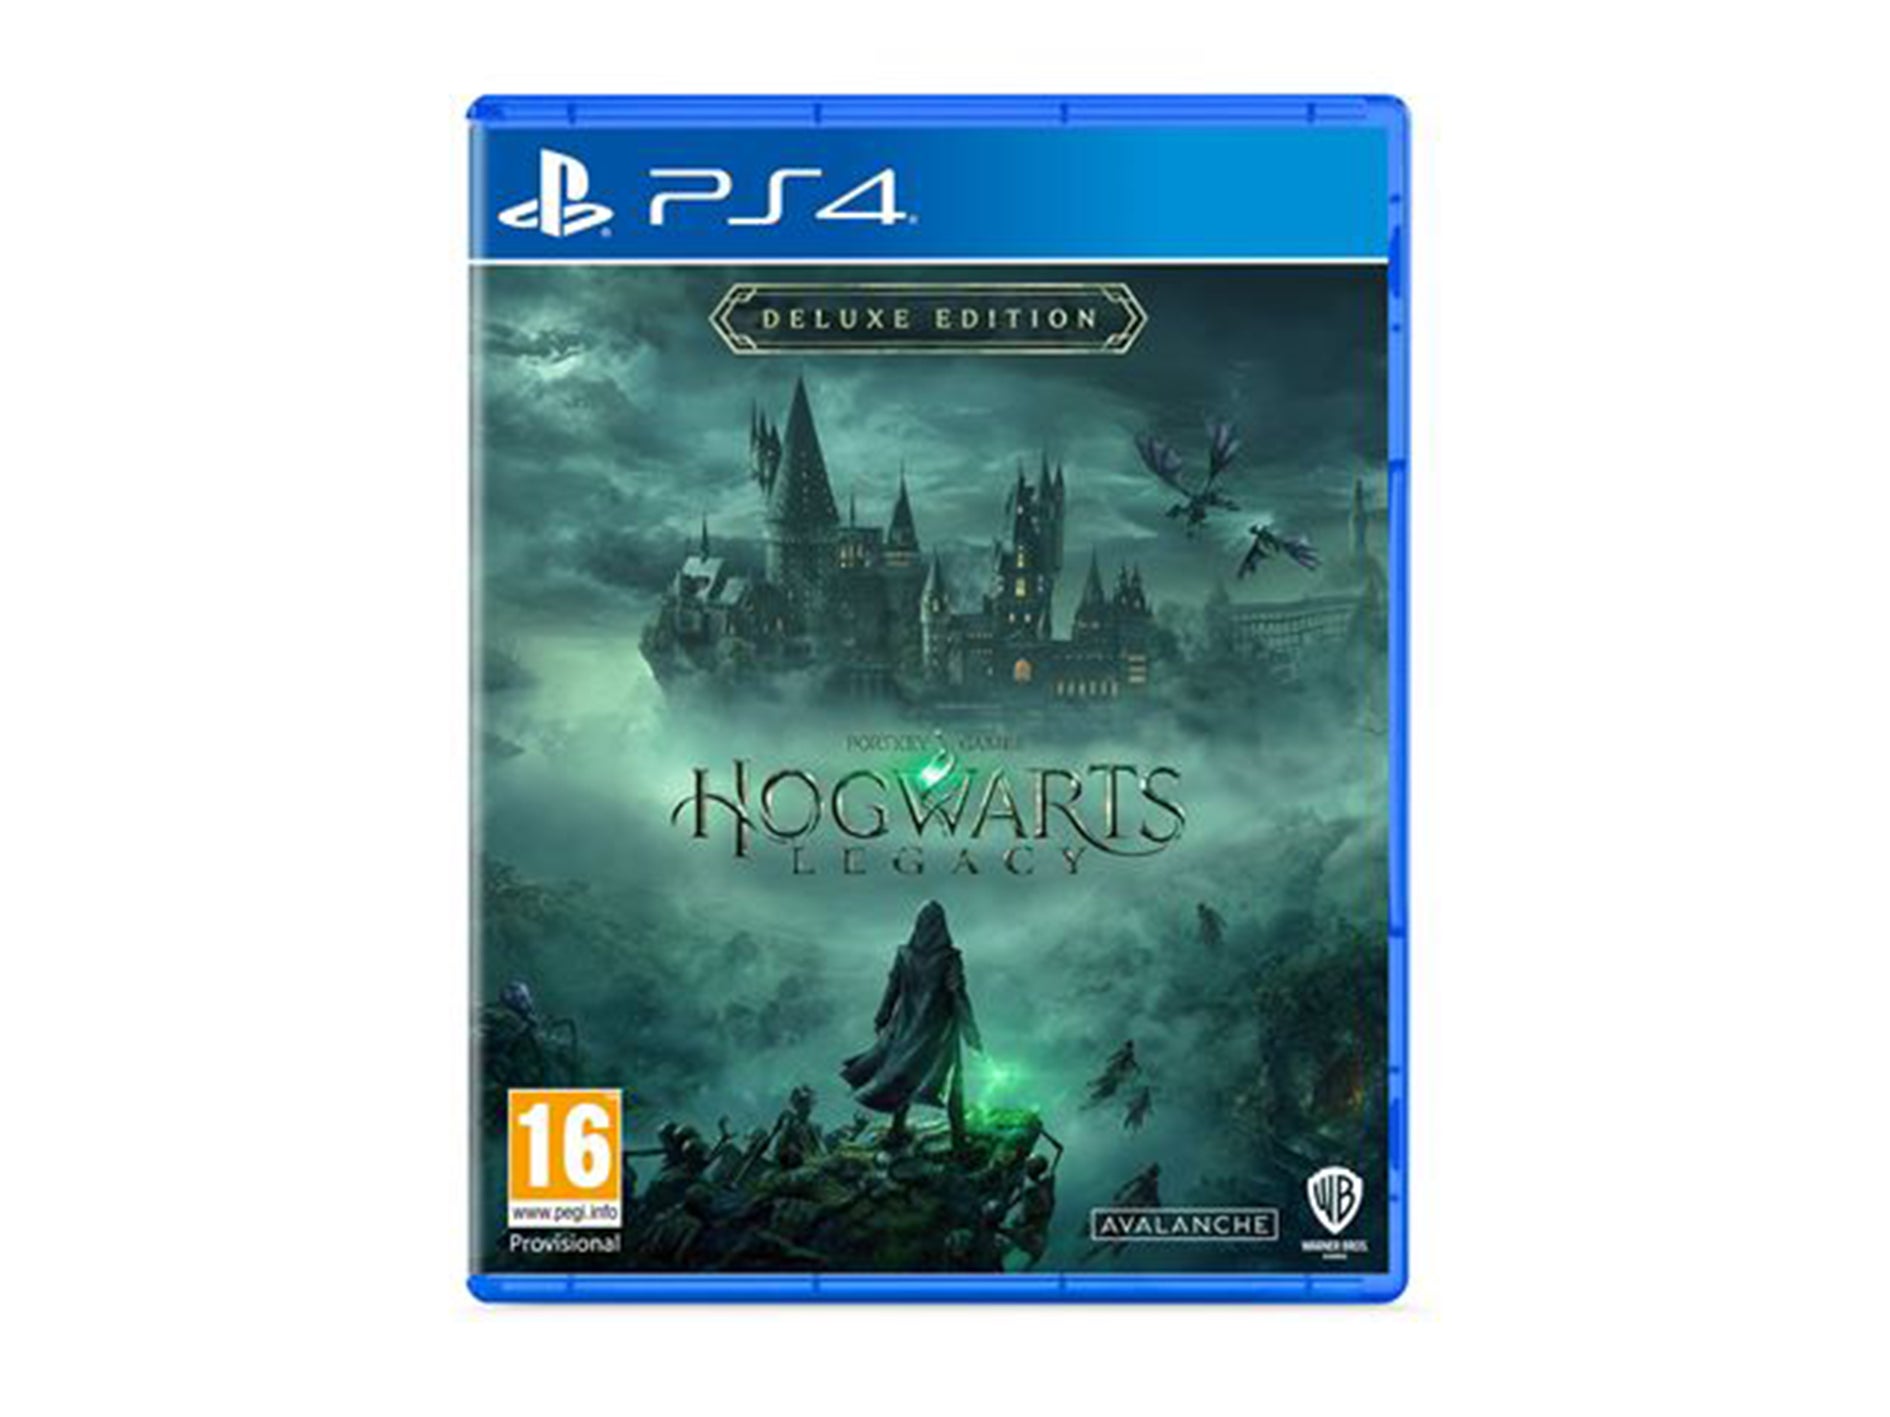 Hogwarts Legacy - Deluxe Edition (PS4) • Prices »